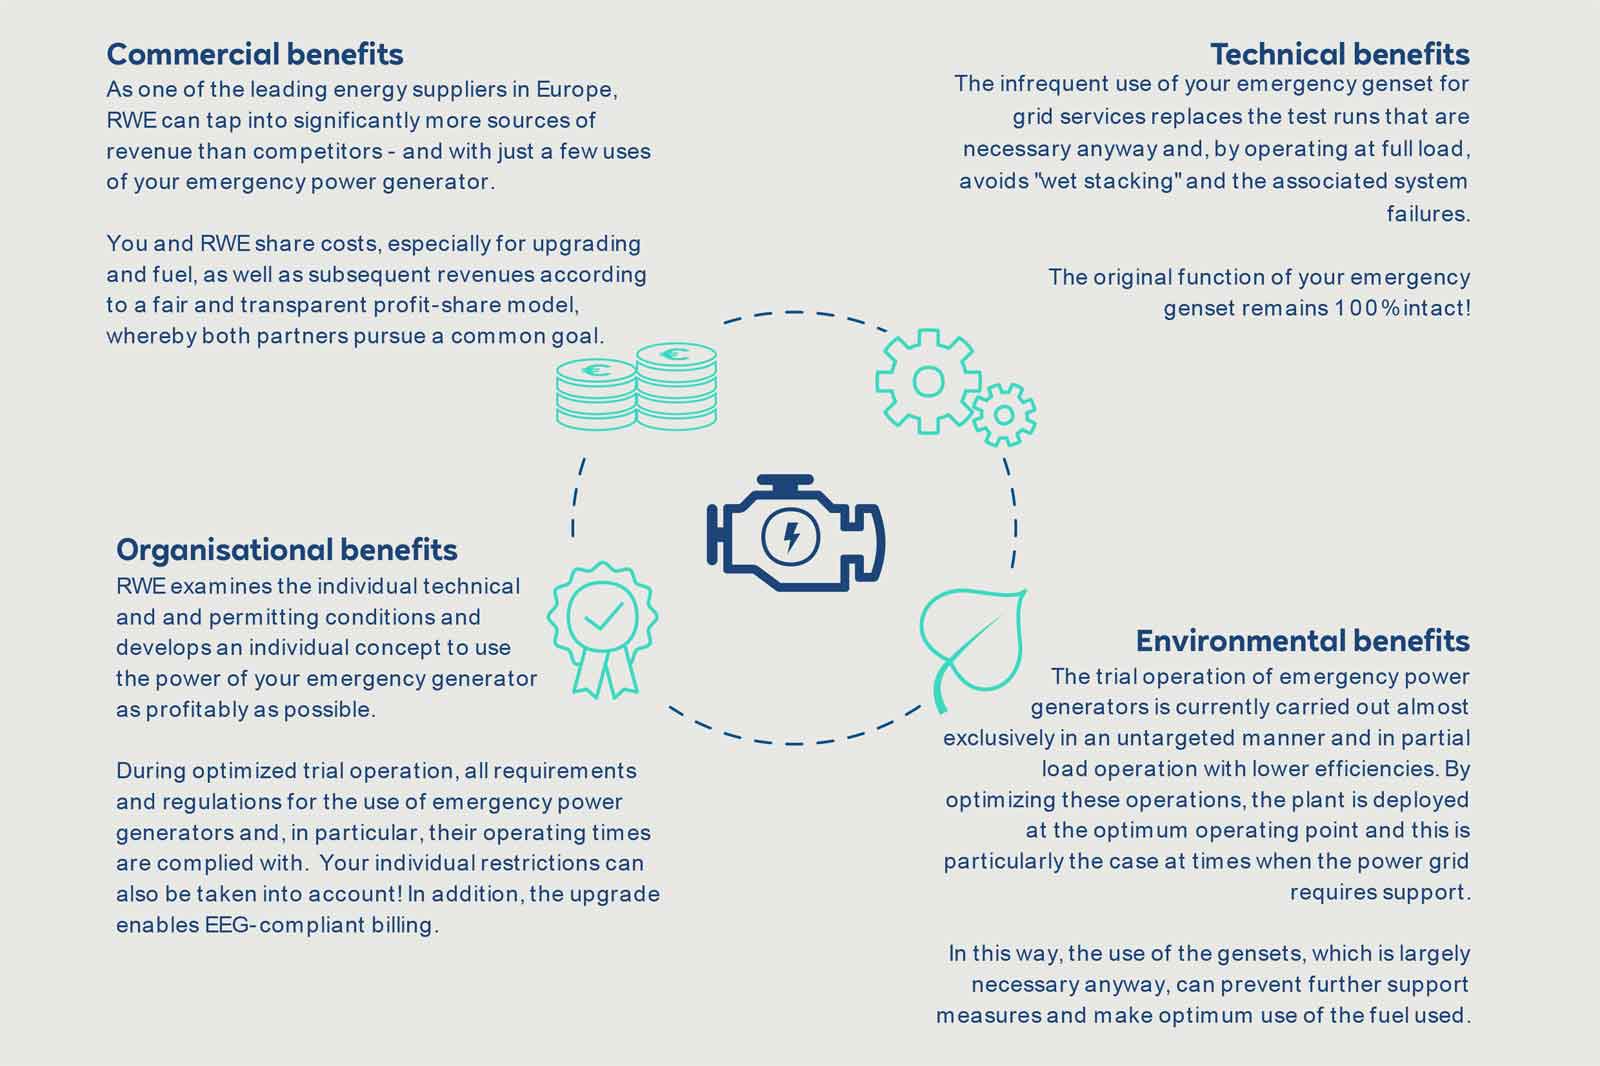 Advantages of the RWE product at a glance